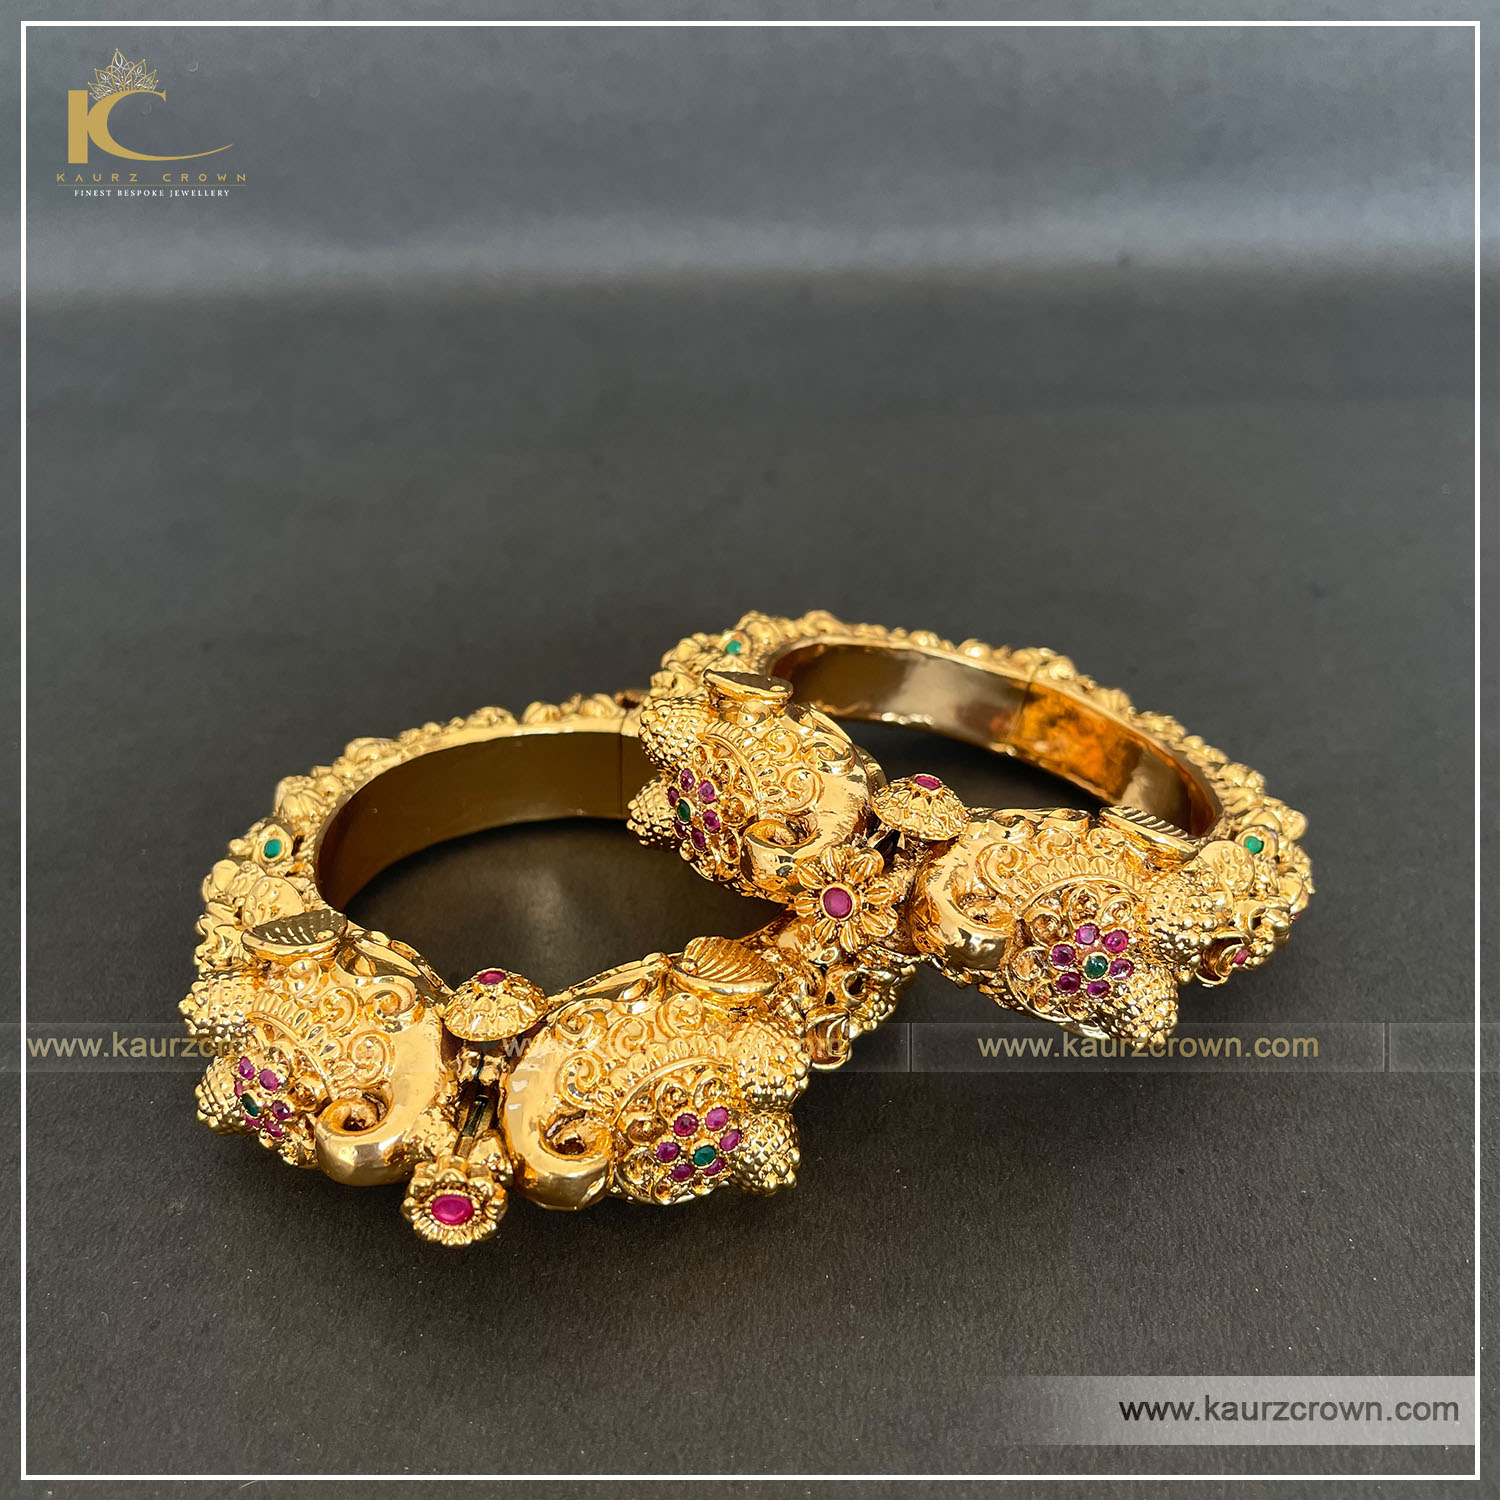 Surmai Traditional Antique Gold Plated Bangles – KaurzCrown.com